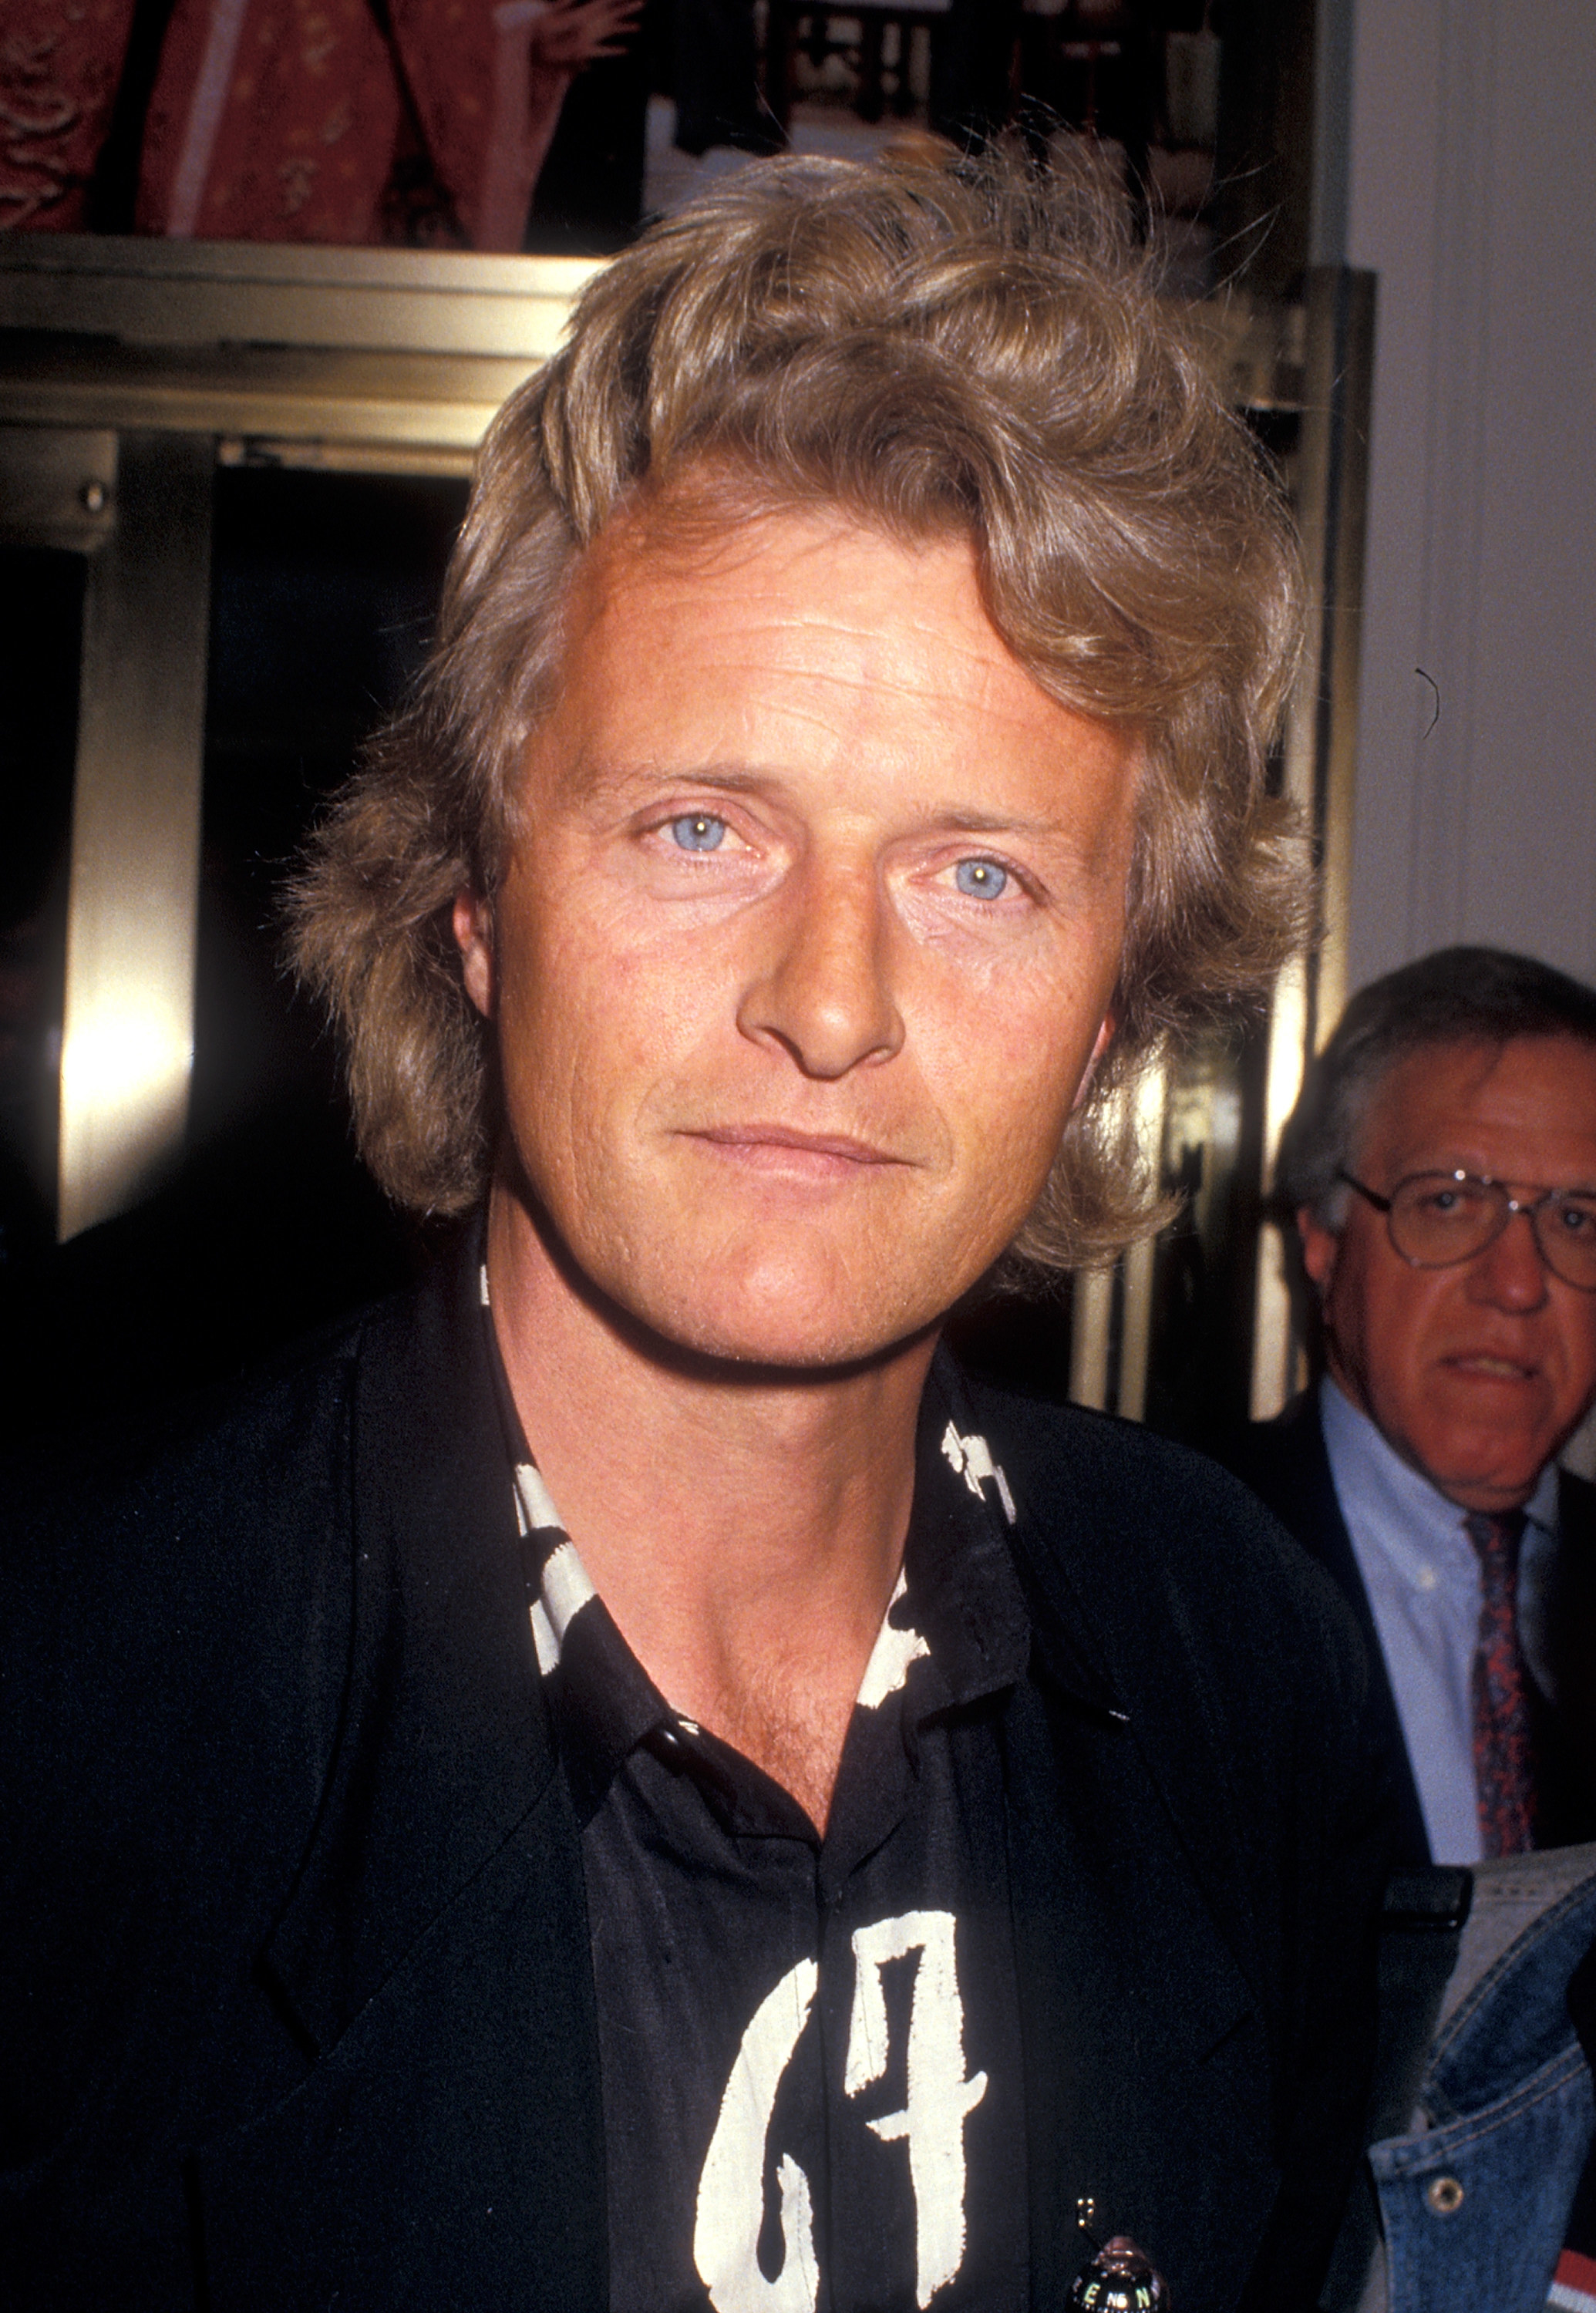 Rutger Hauer posing for a picture outside of a theater